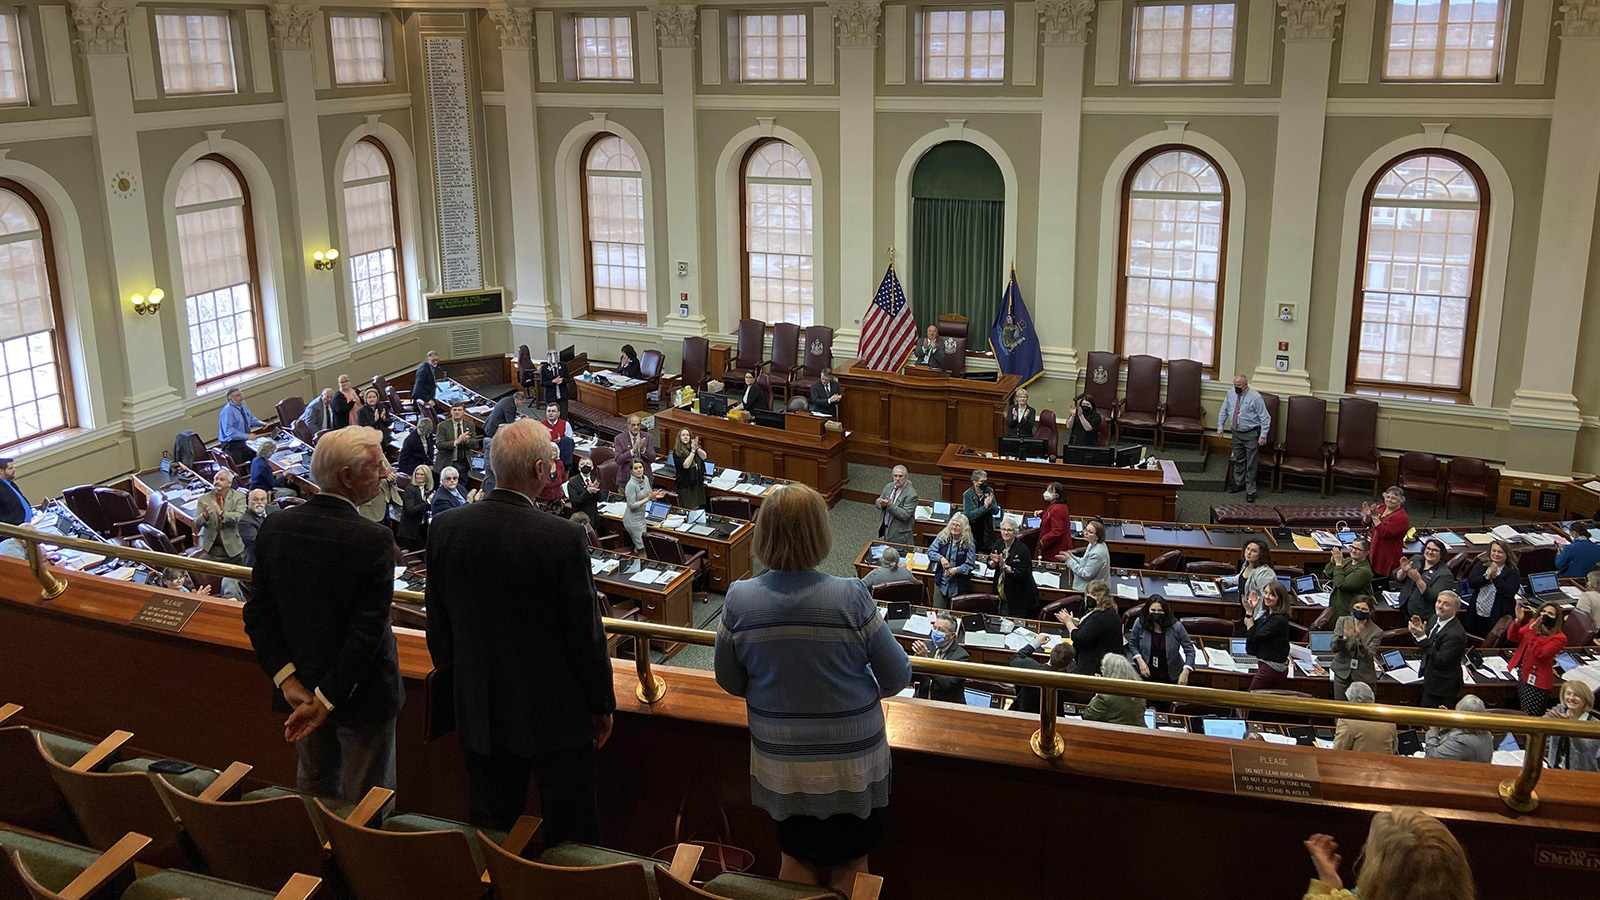 President Ferrini-Mundy, professor George Jacobson, and Maine Chamber of Commerce President Dana Connors standing in balcony of state house while Maine Legislature congratulates UMaine's attainment of R1 research classification